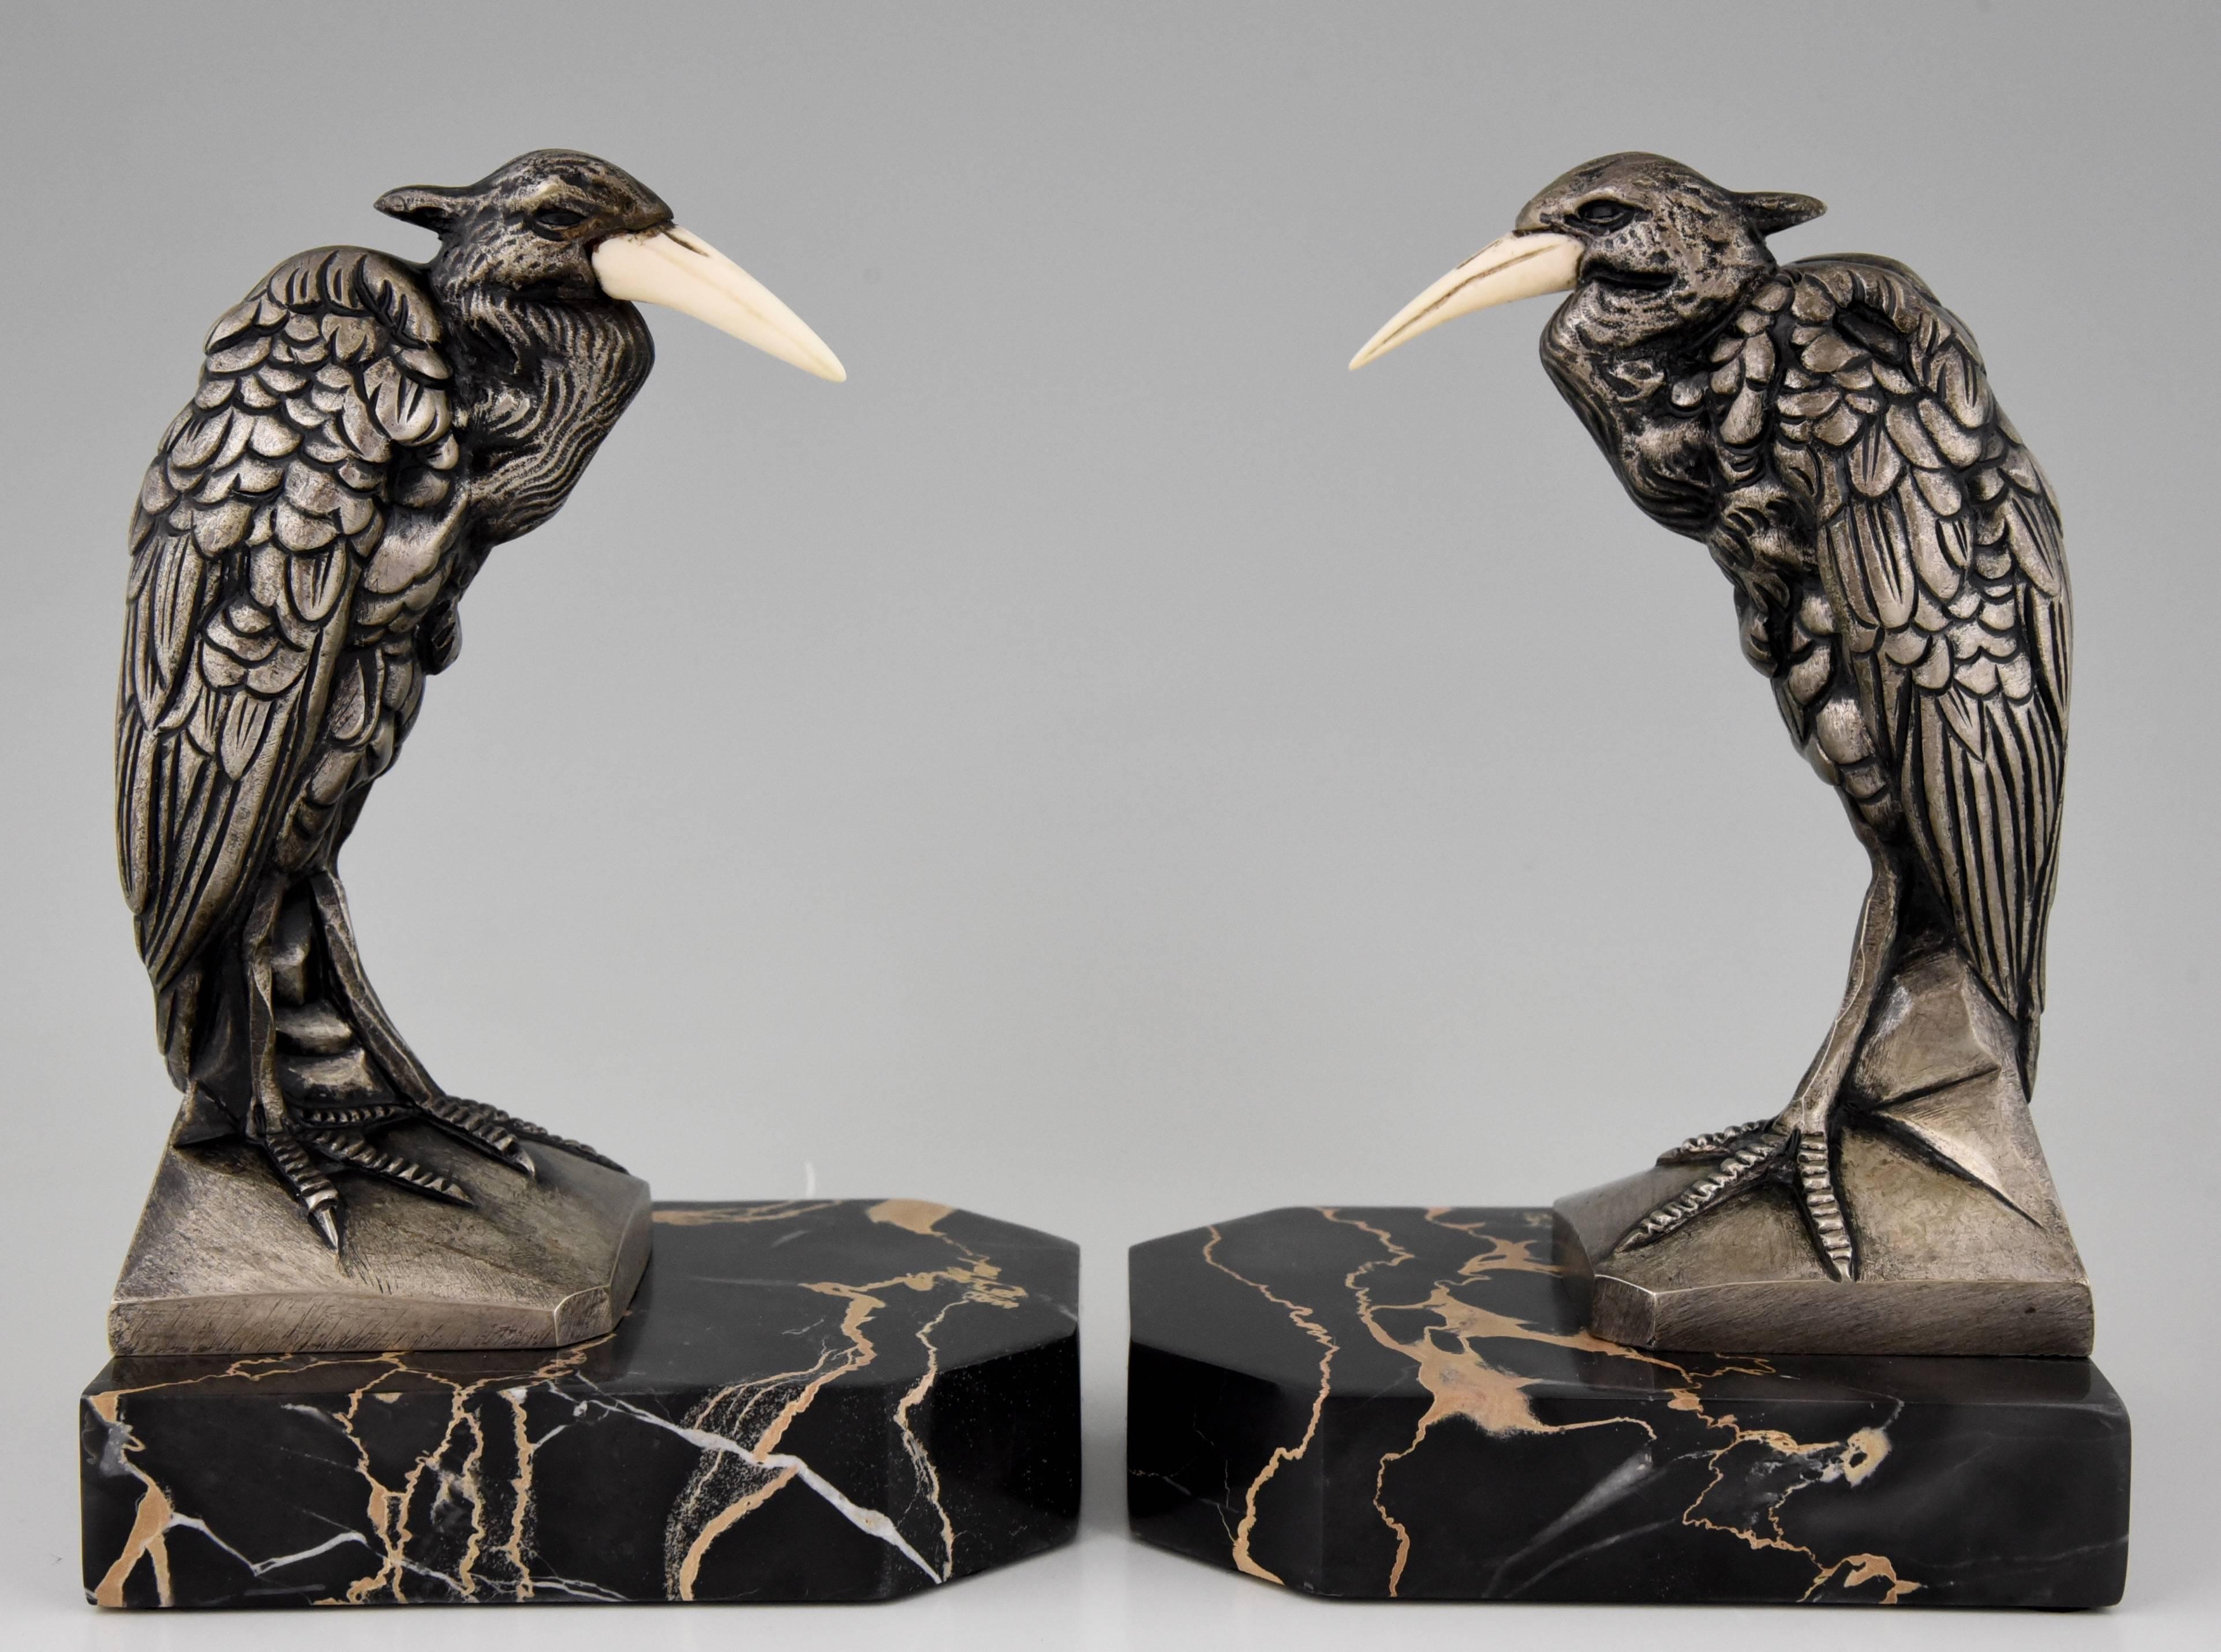 Description:  Art Deco bronze heron bird bookends on a marble base.
Artist / maker: Manin.
Signature / marks: Manin.
Style: Art Deco.
Date: 1930.
Material:  Bronze with silver patina.  Marble base.
Origin: France.
Size of one:
H. 7.7 inch. x